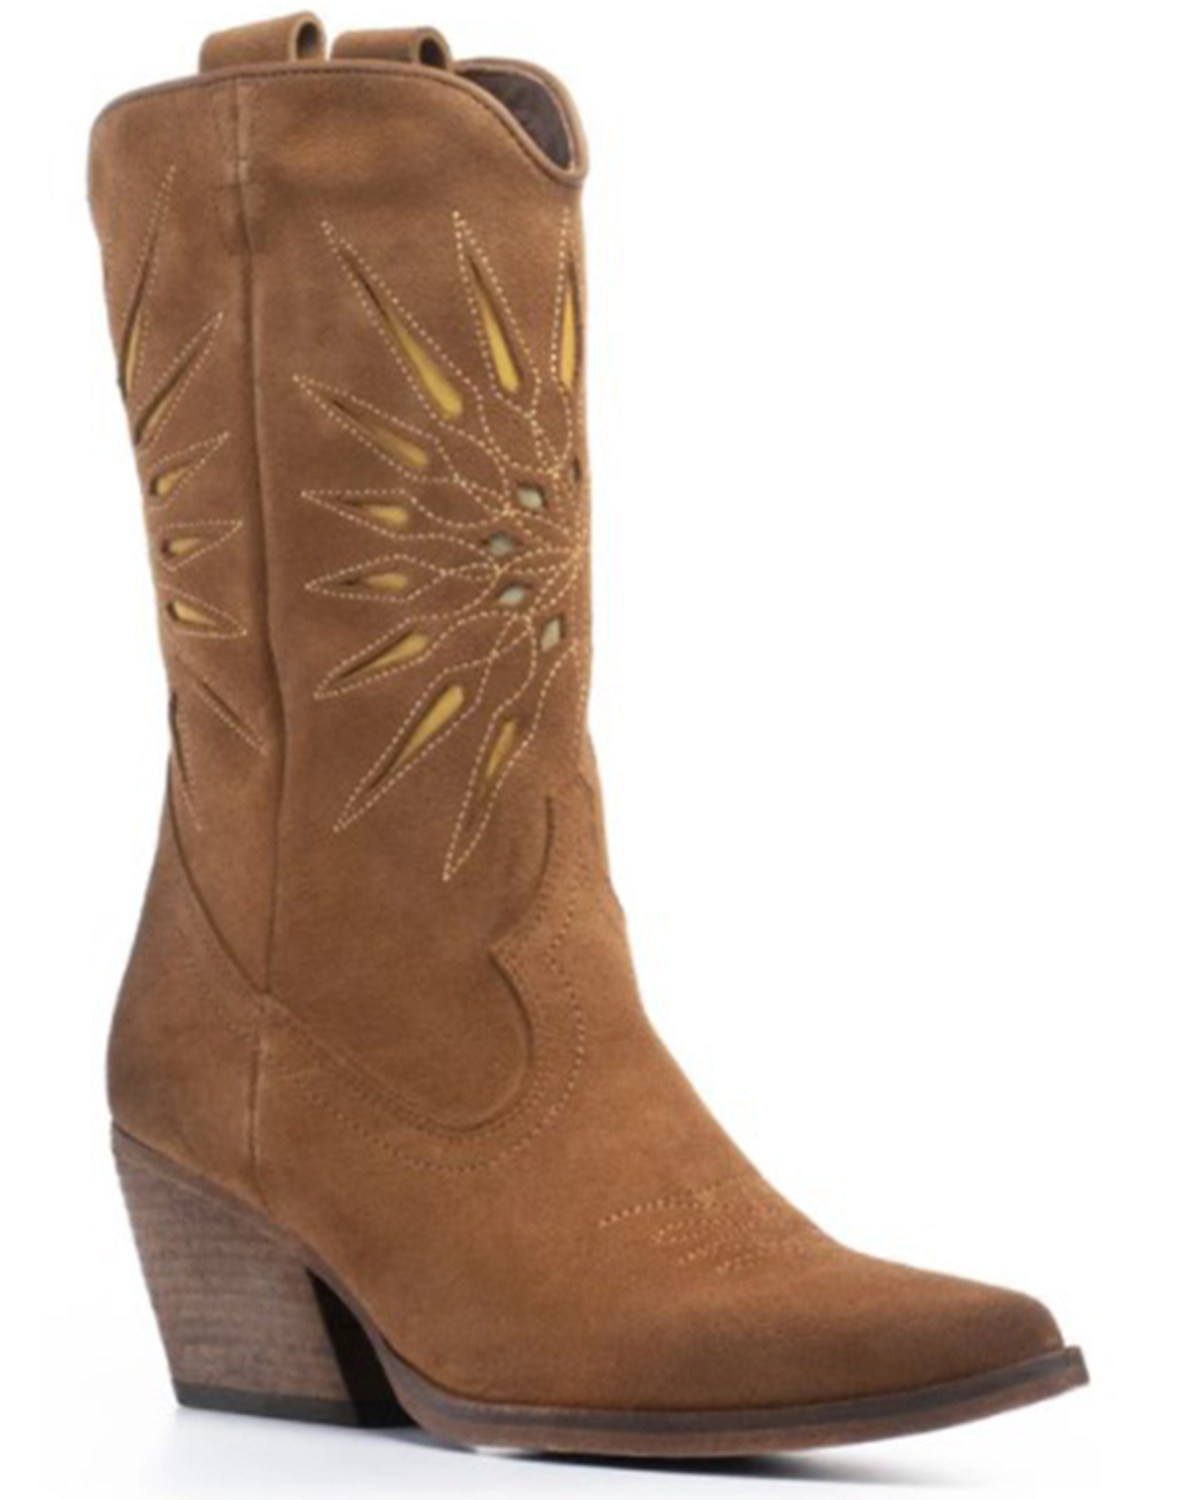 Golo Women's Contrasting Inlaid Sun Western Boots - Pointed Toe